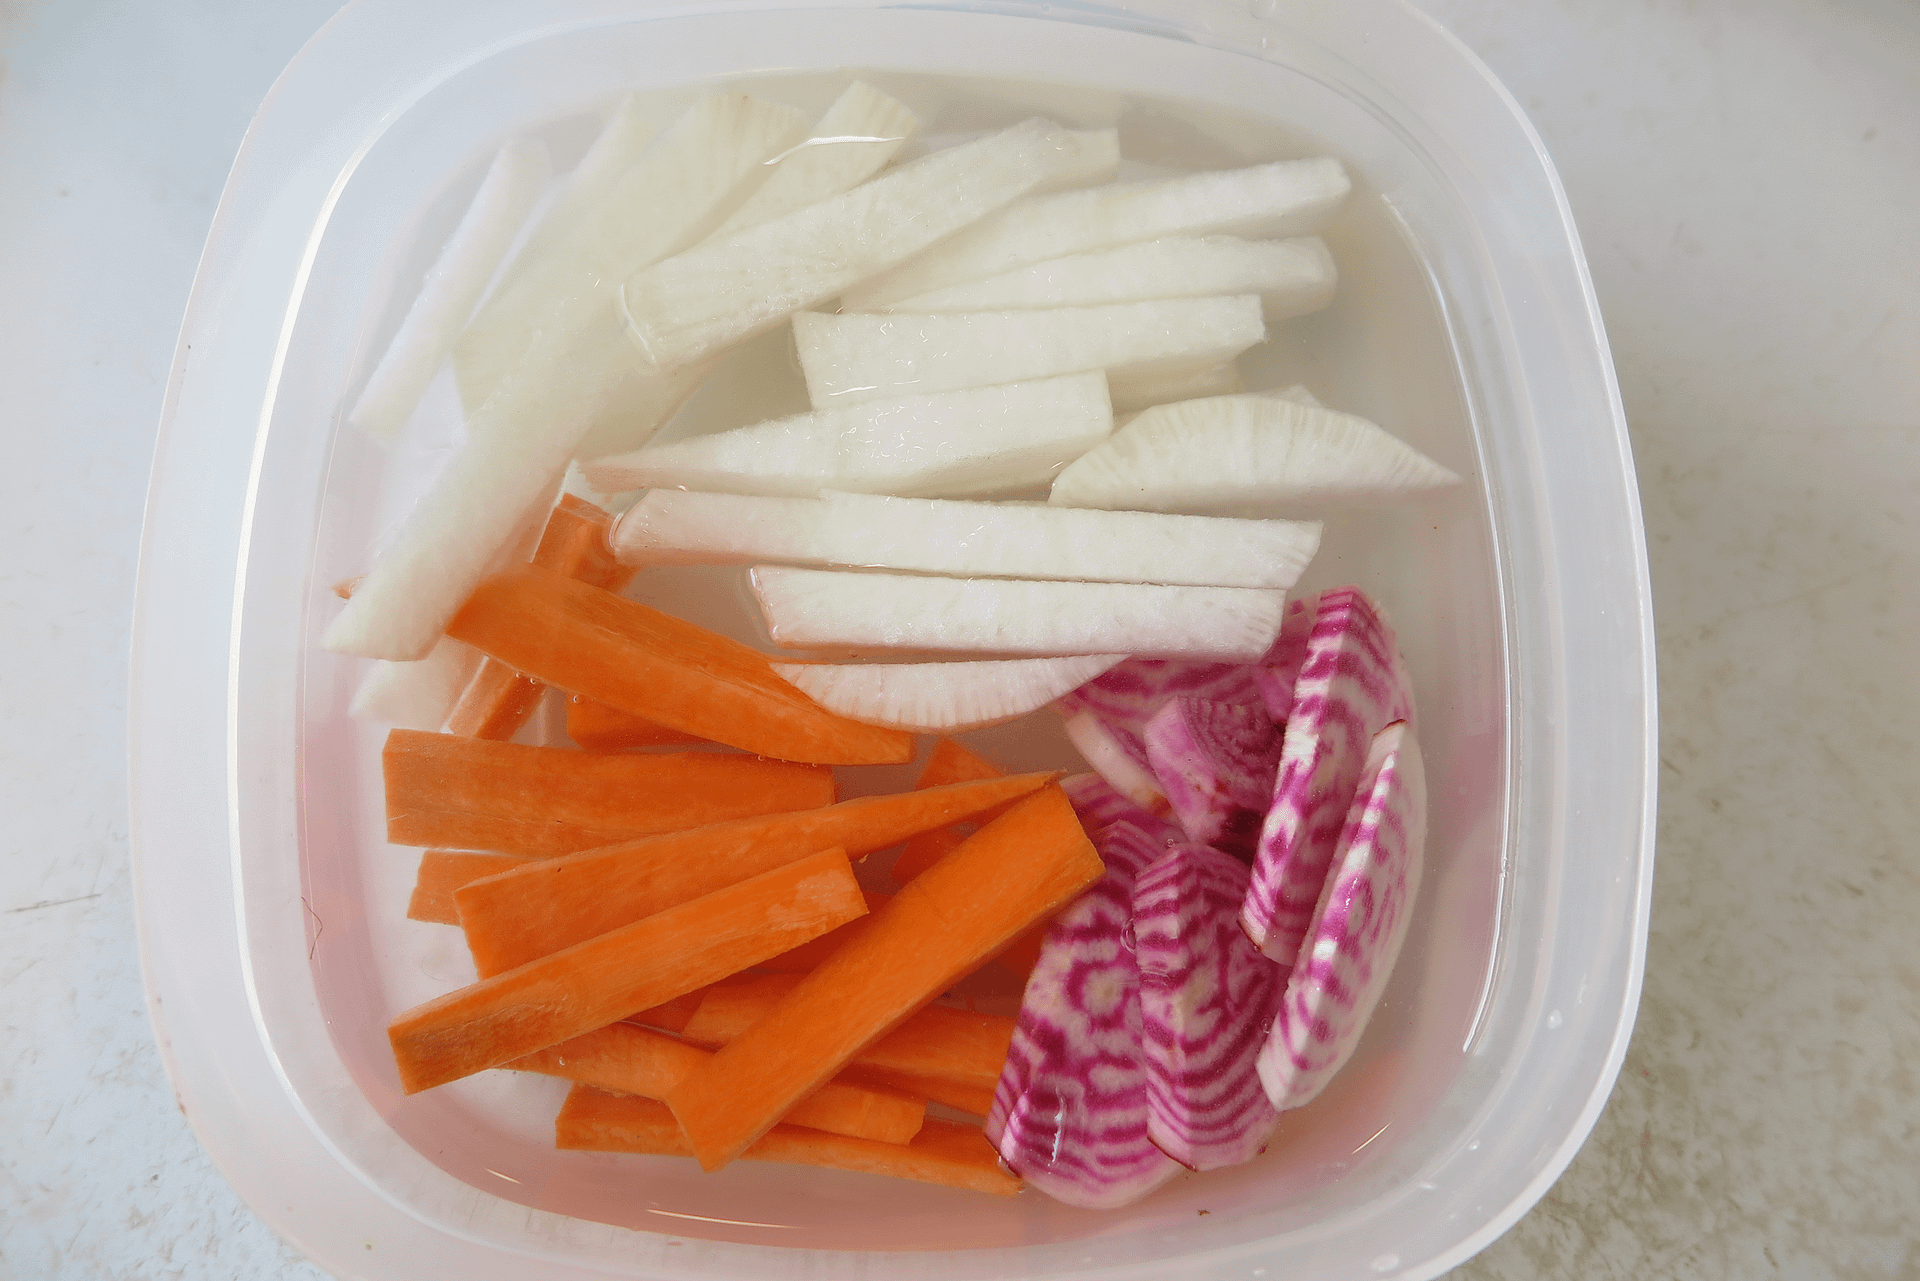 Sliced root vegetables submerged in water in a tupperware container